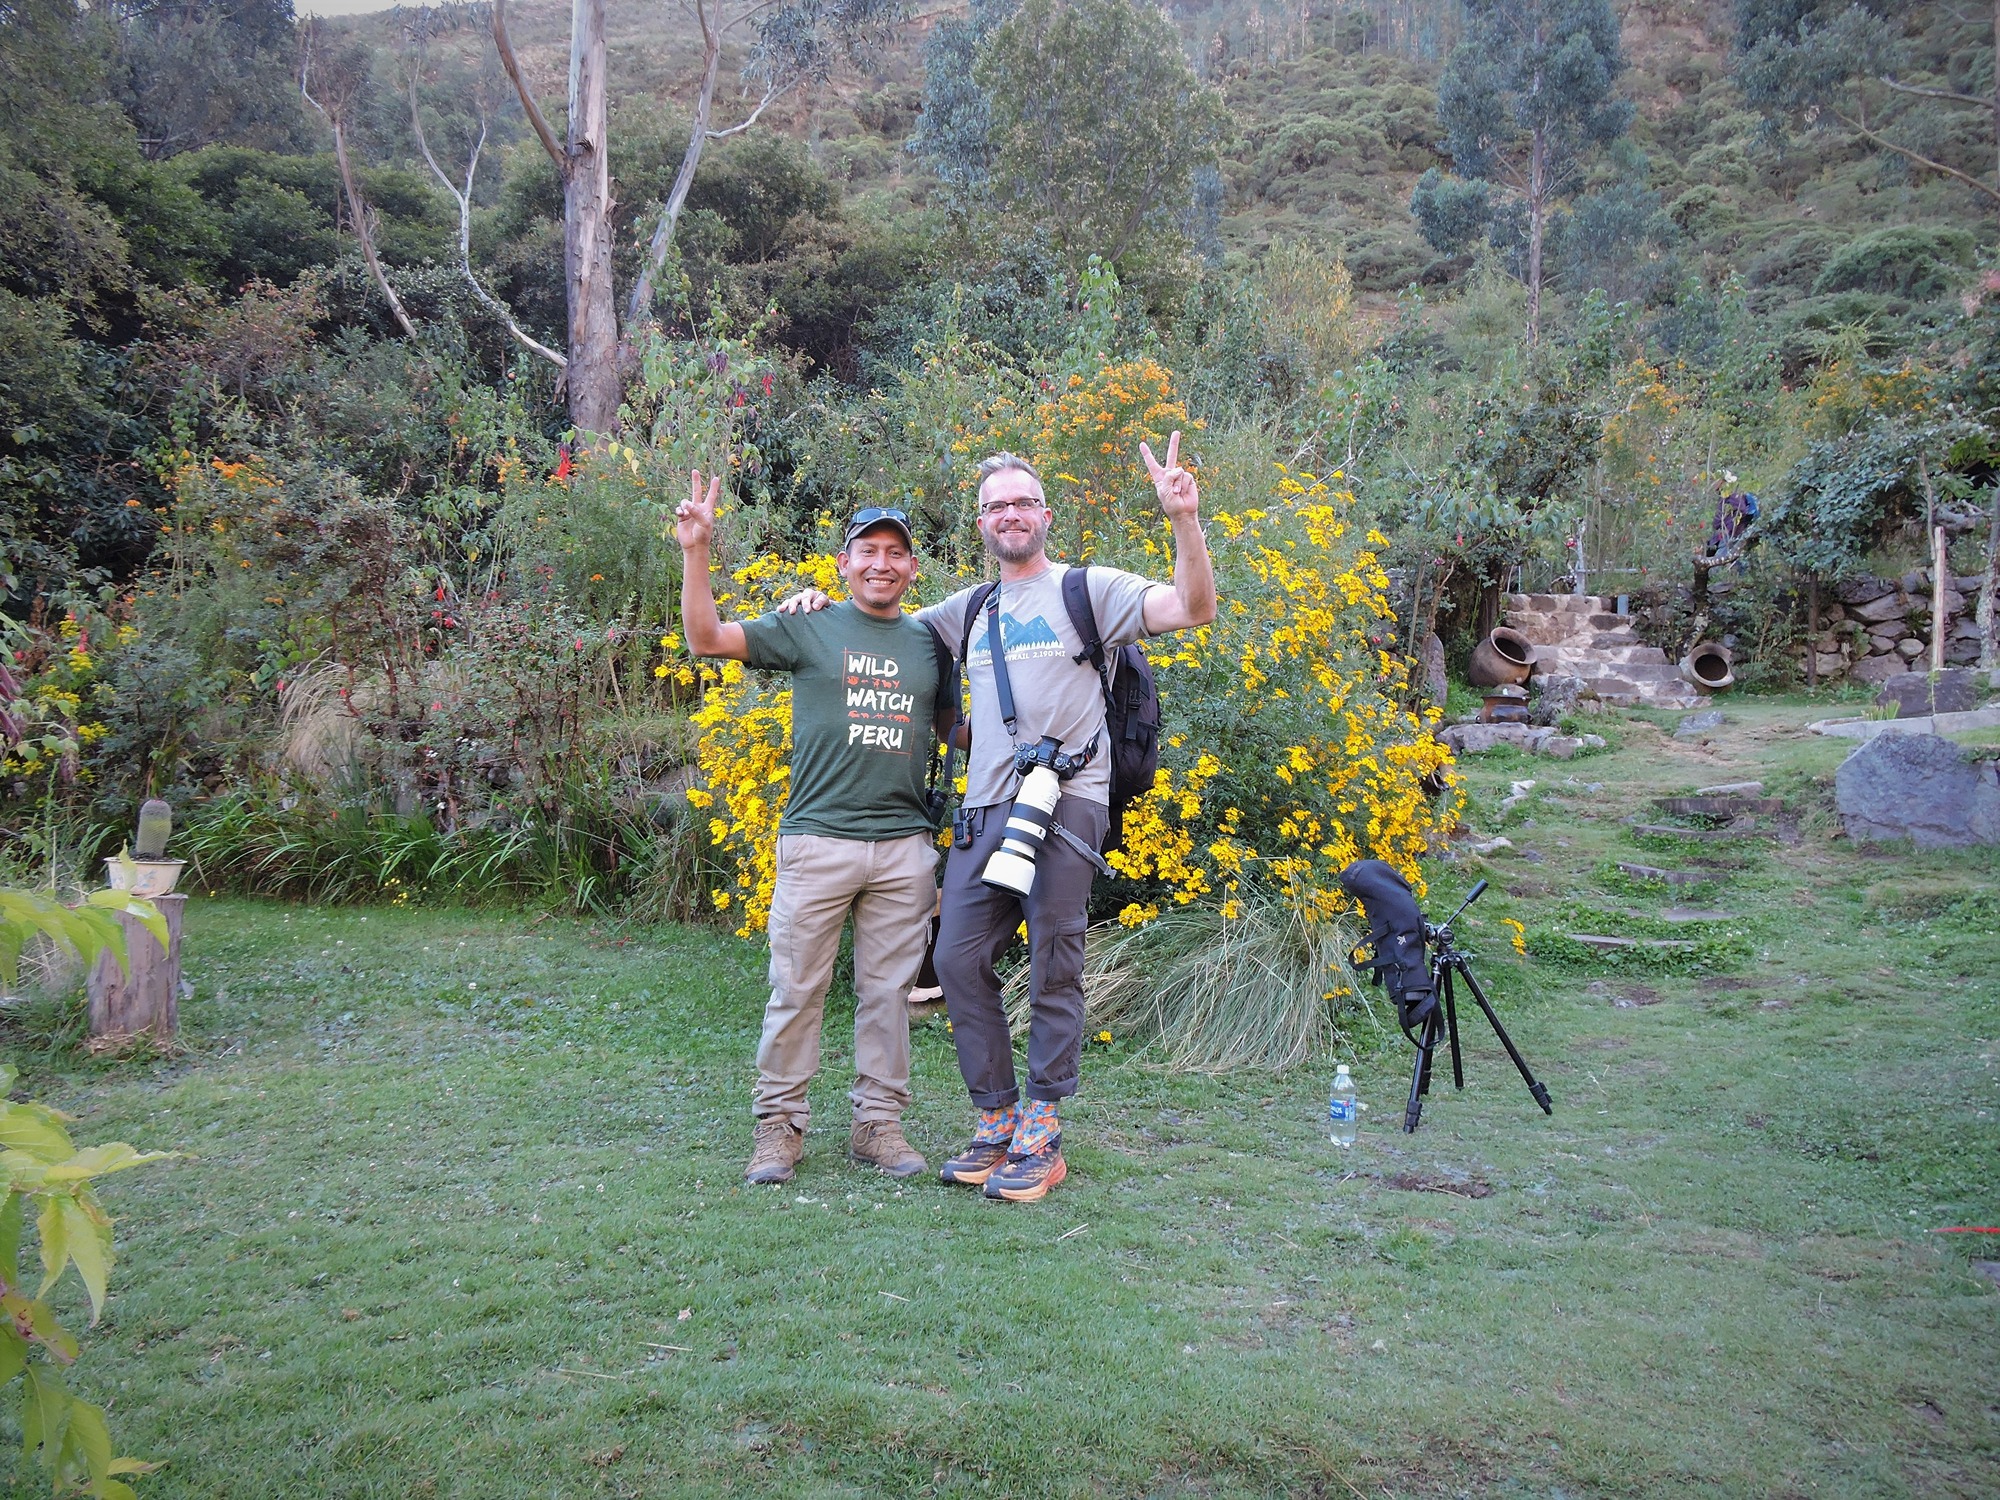 Ensifera Camp - Birding in Cusco - The camp also offers accommodation for visitors, so you can stay for a few days and really immerse yourself in the experience. Whether you’re an experienced birder or just starting out, Ensifera Camp Hummingbird Garden is sure to provide an unforgettable experience. So don’t wait any longer – plan your visit today and discover the wonders of this incredible bird sanctuary!